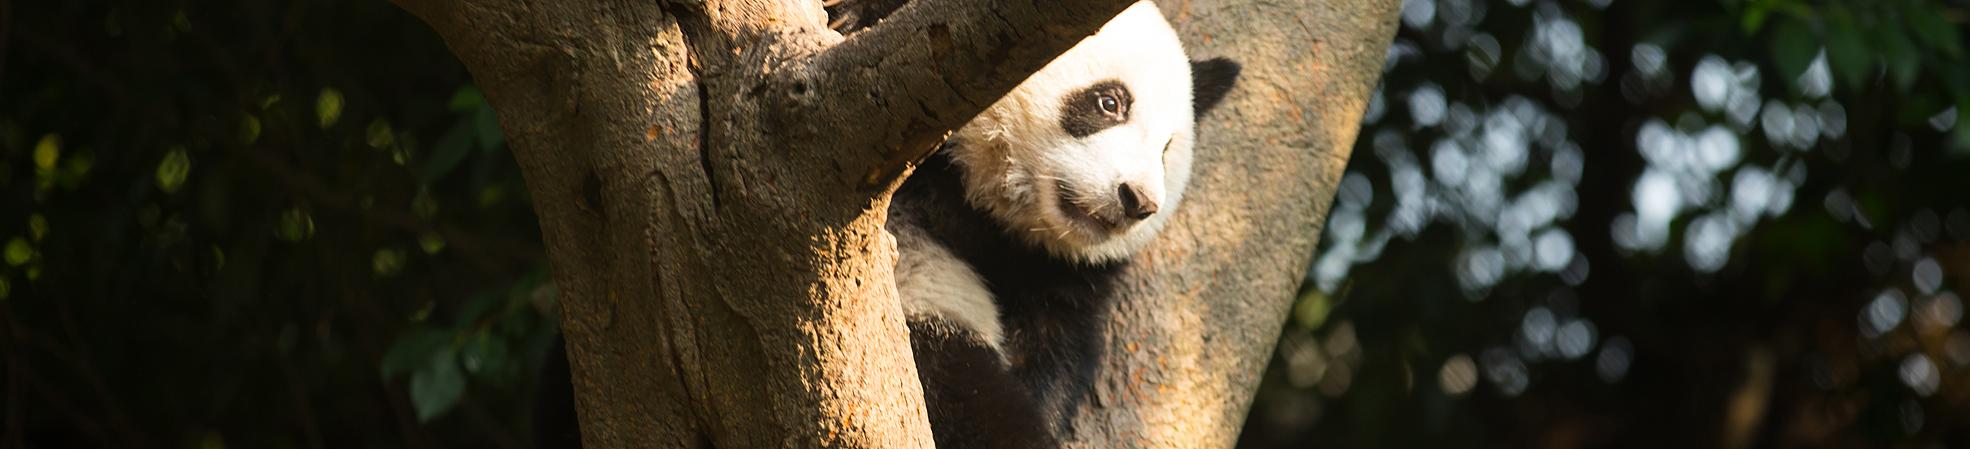 All You Want to Know About the Giant Panda